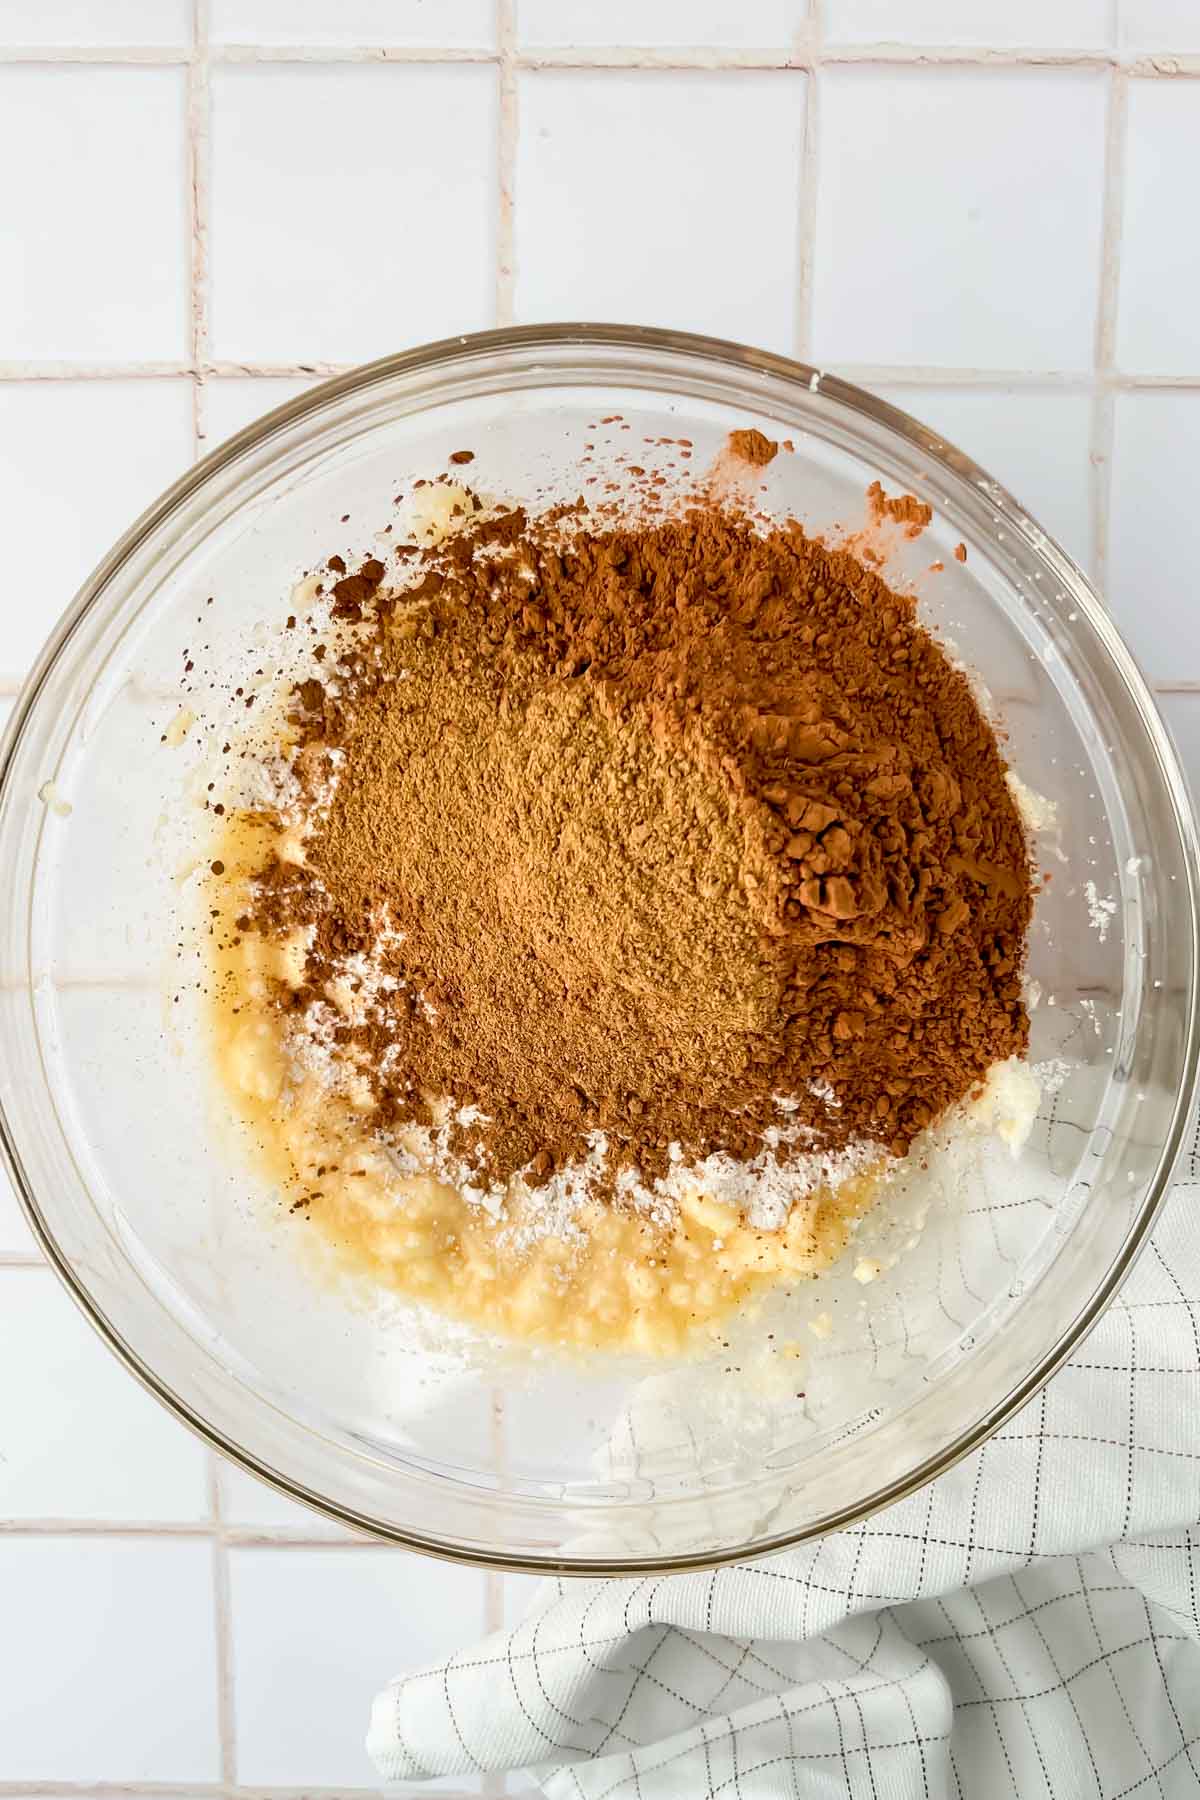 cocoa powder and remaining dry ingredients added to creamed butter in glass mixing bowl.